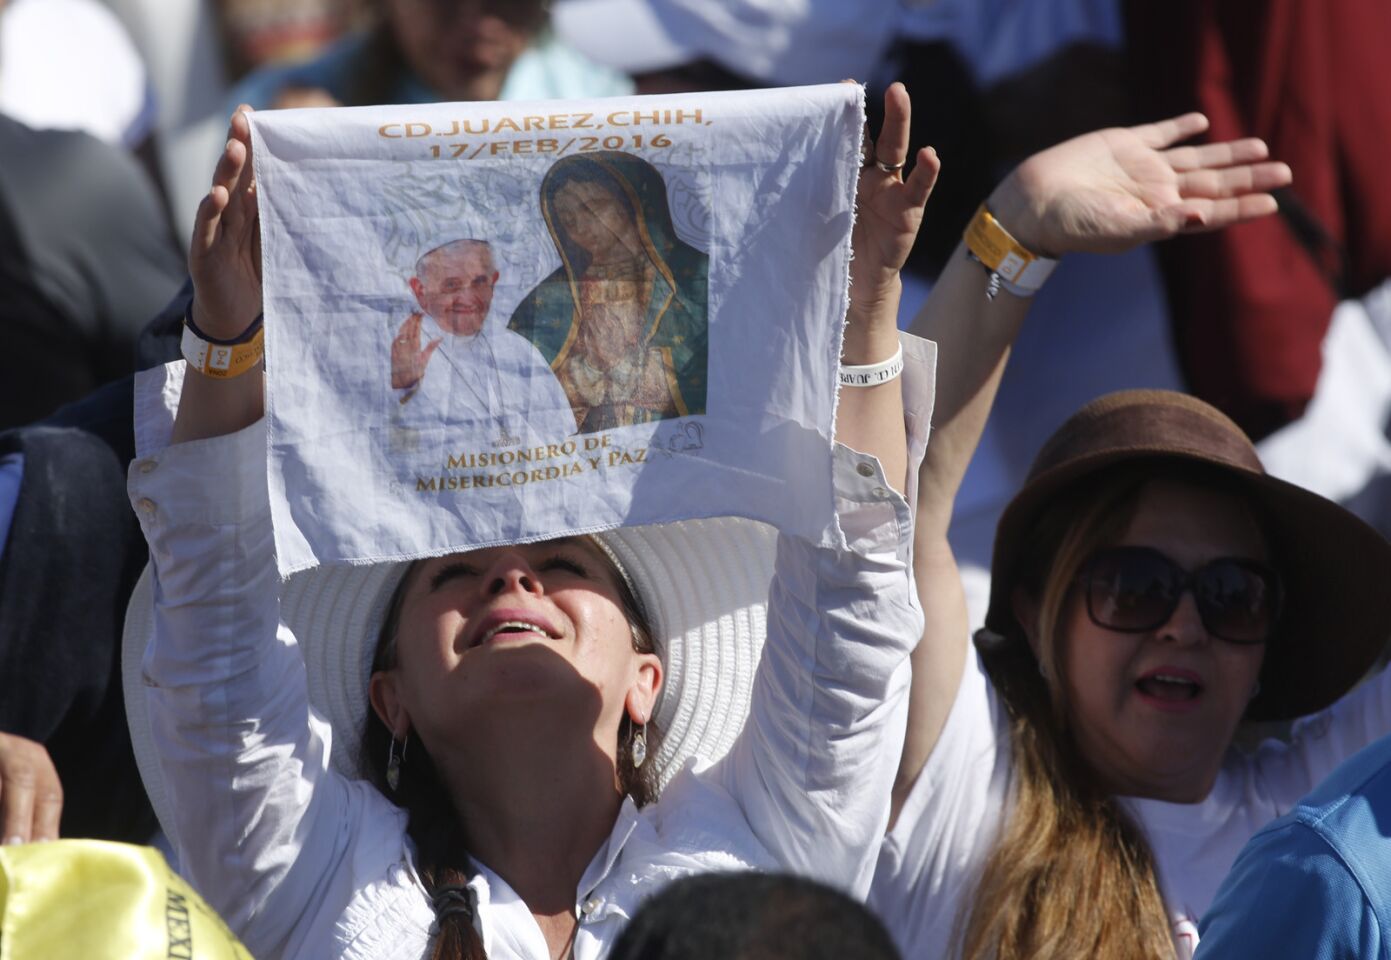 People react as Pope Francis prays Wednesday in support of migrants from a cross-shaped altar looking over the Rio Grande toward El Paso, Texas, at El Punto fairgrounds in Ciudad Juarez, Mexico.